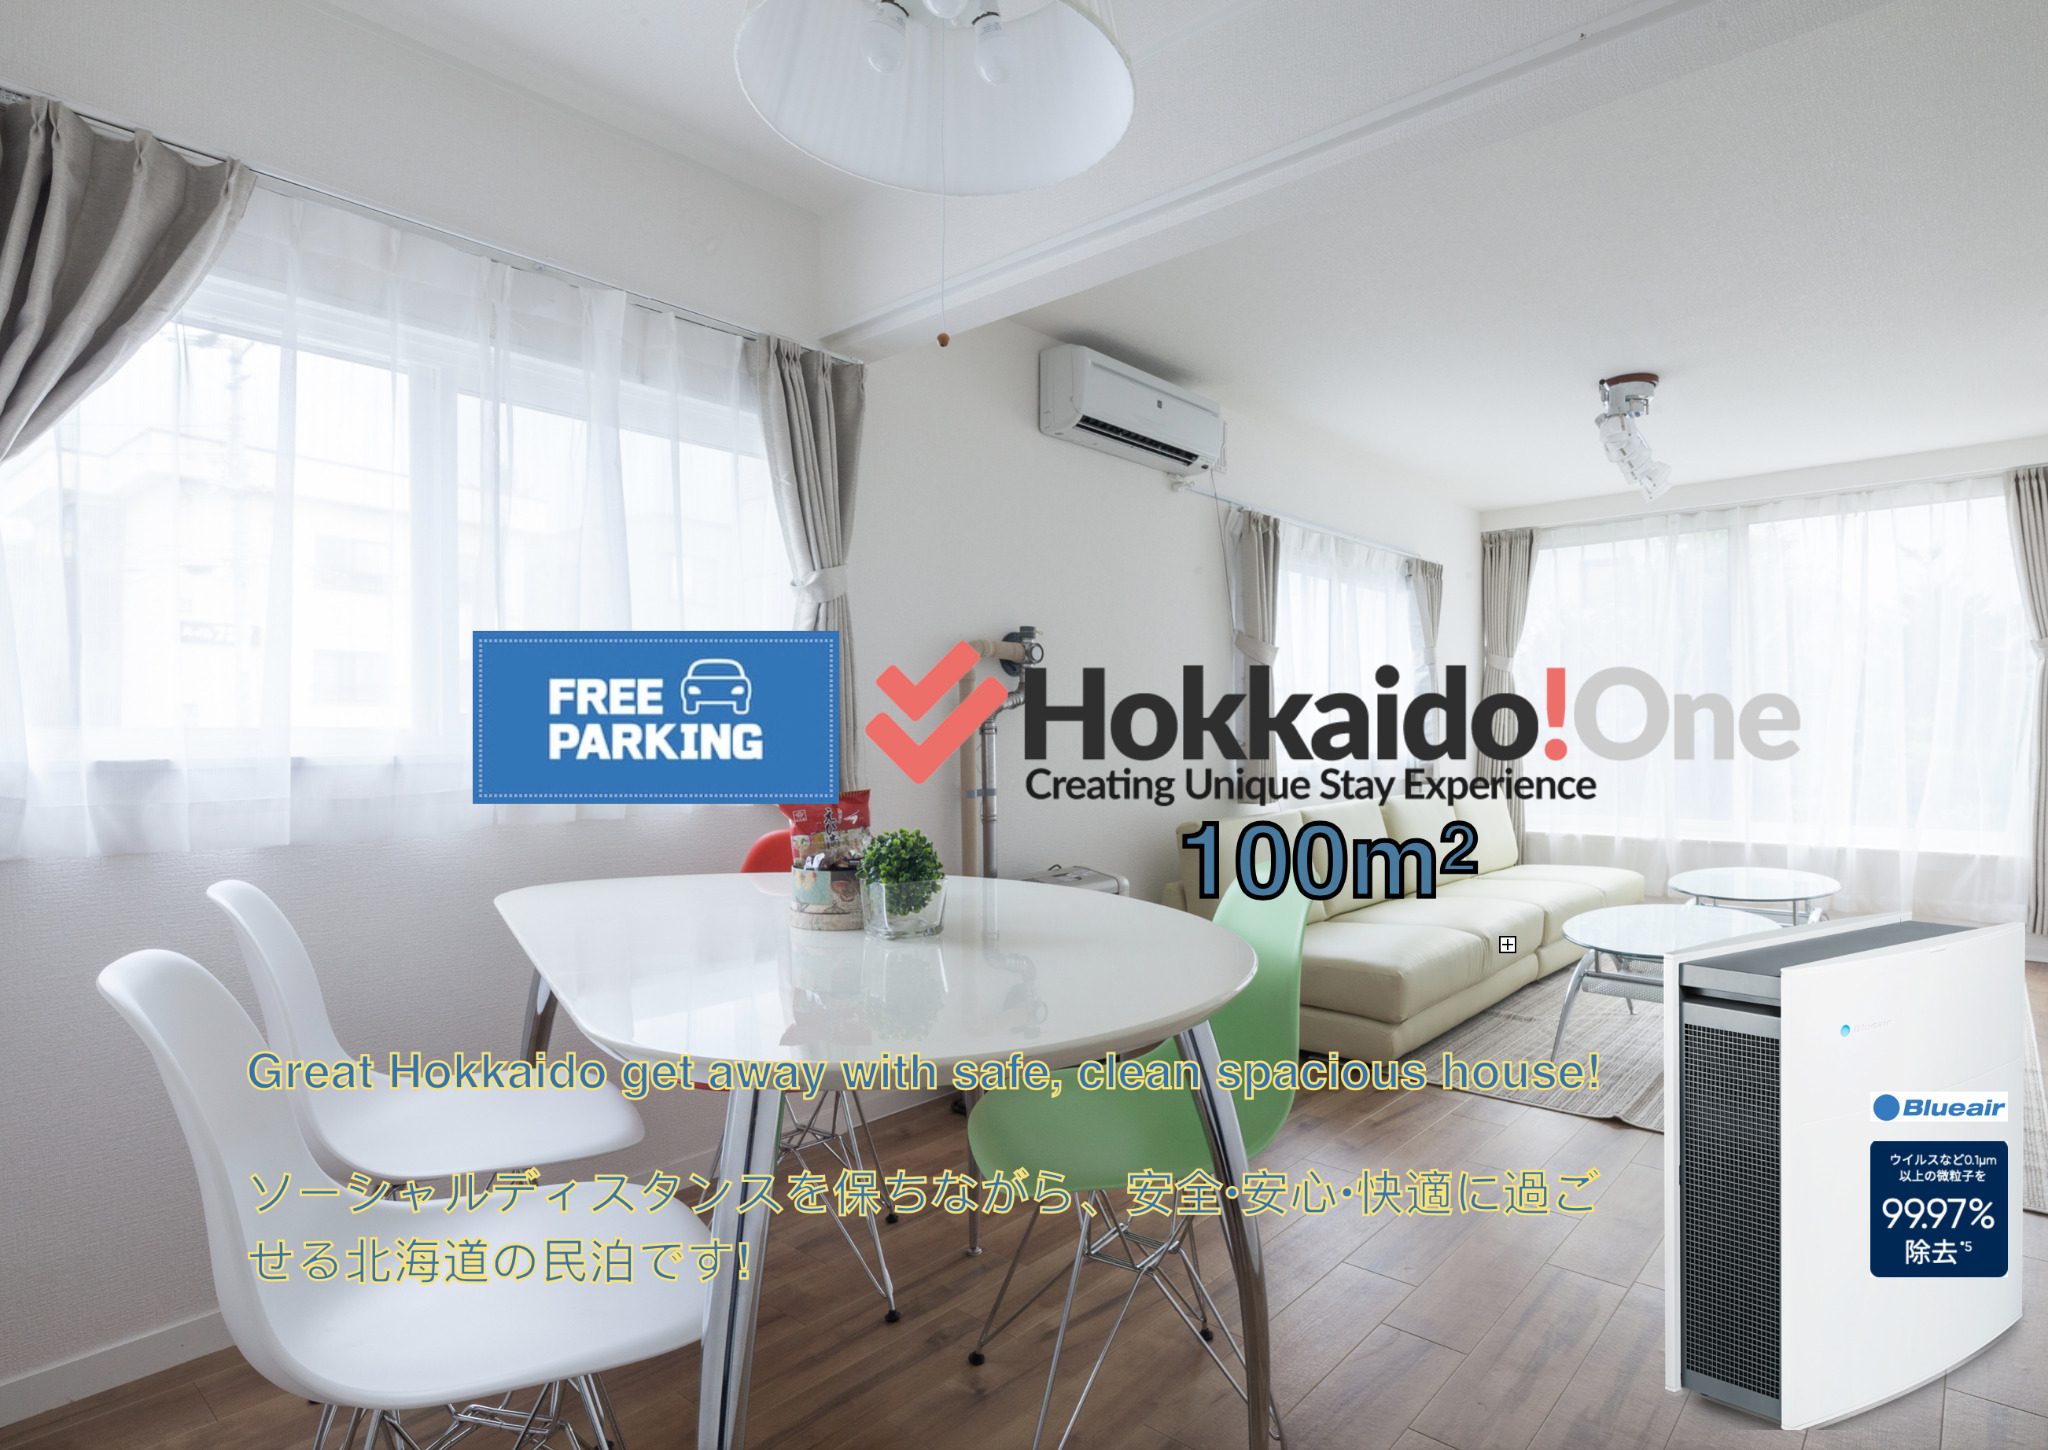 HDO 24軒 House 4LDK with Parking